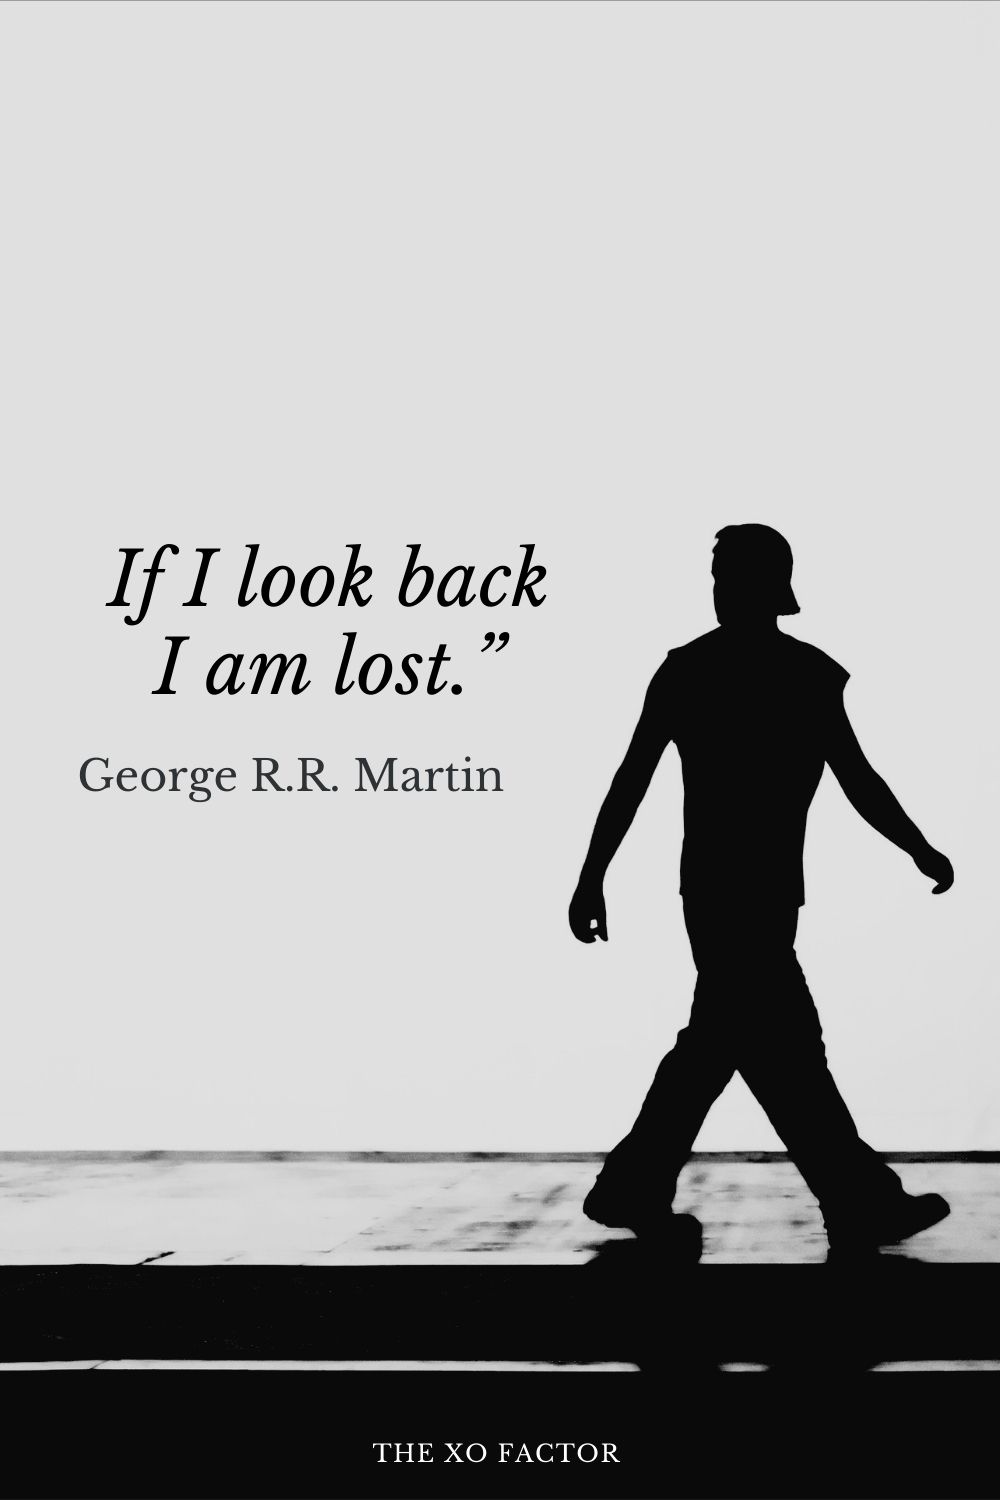 If I look back I am lost.” George R.R. Martin